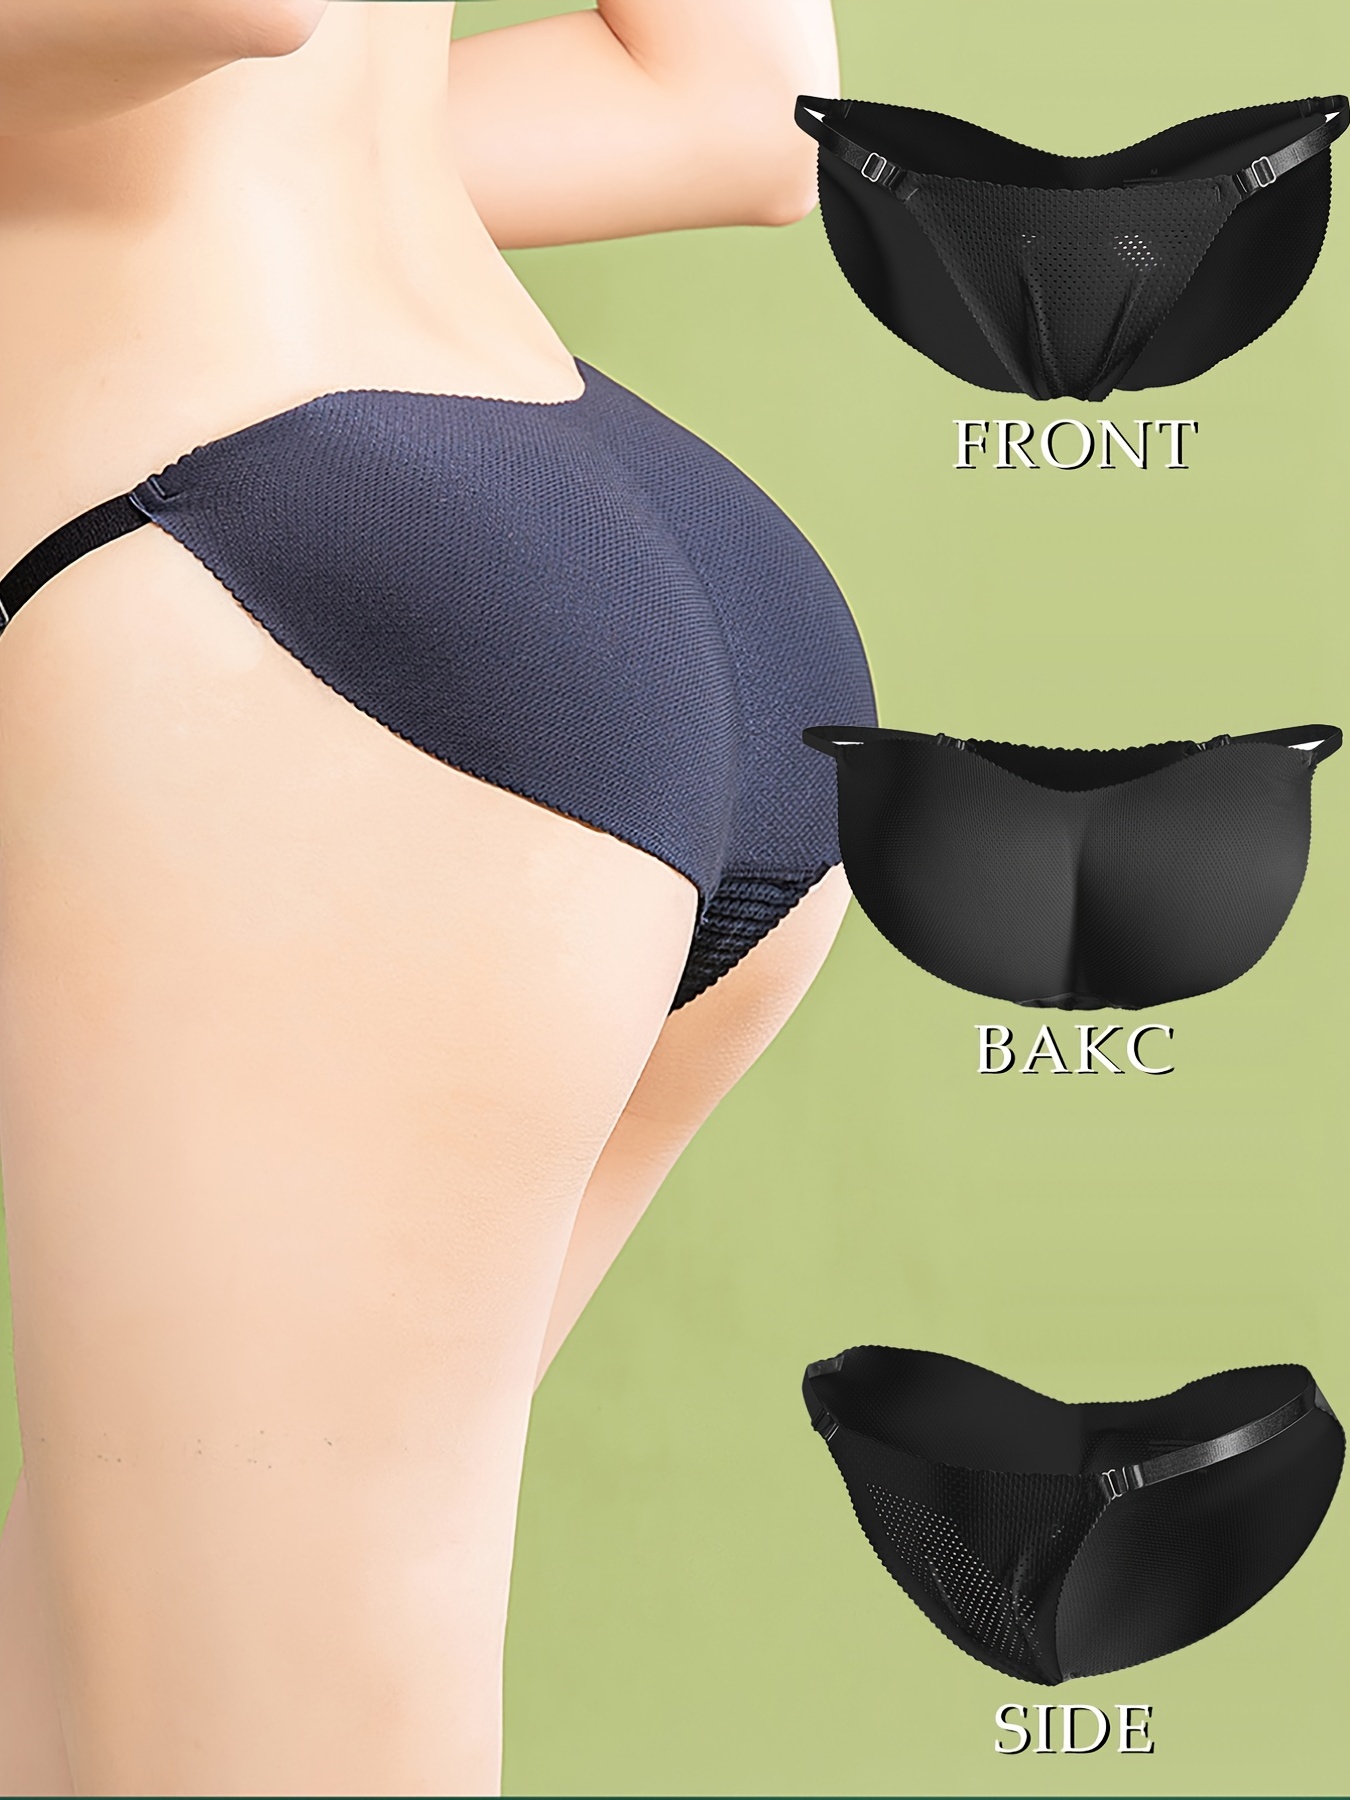 Seamless Breathable Anti-Bacterial Lift Sexy Panties for Women